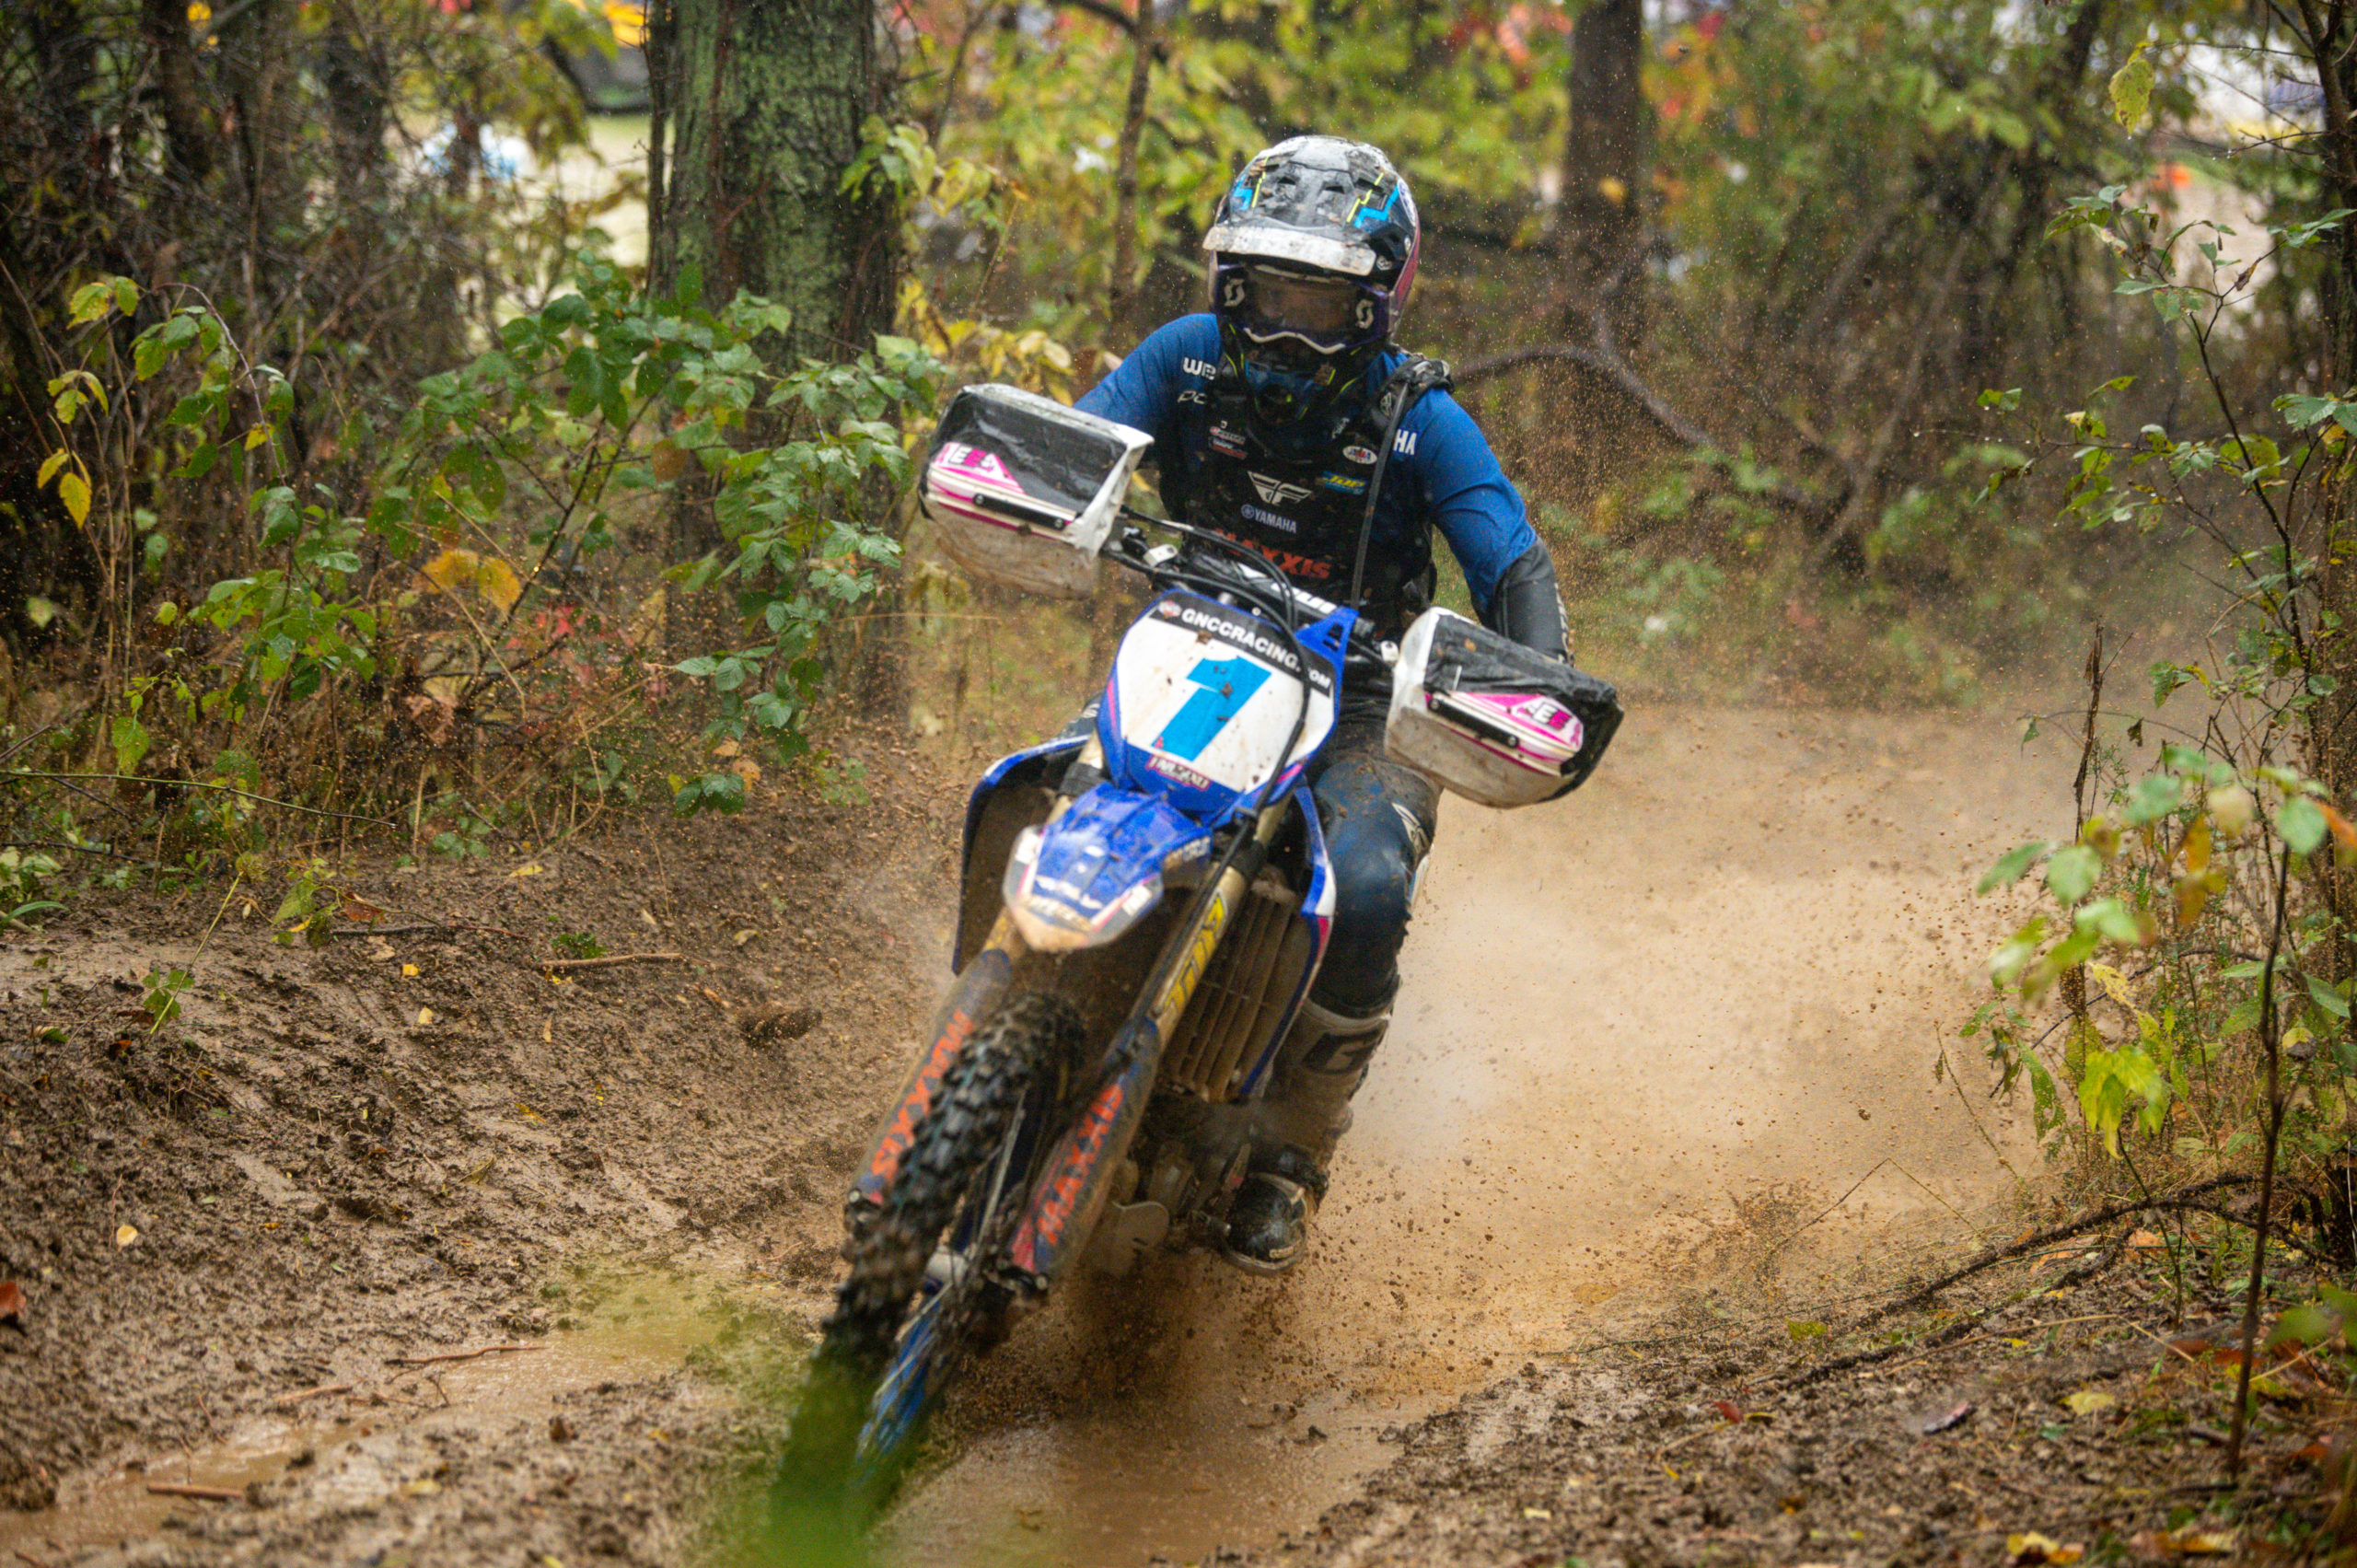 Becca Sheets riding through the mud of Ironman MX in Indiana.